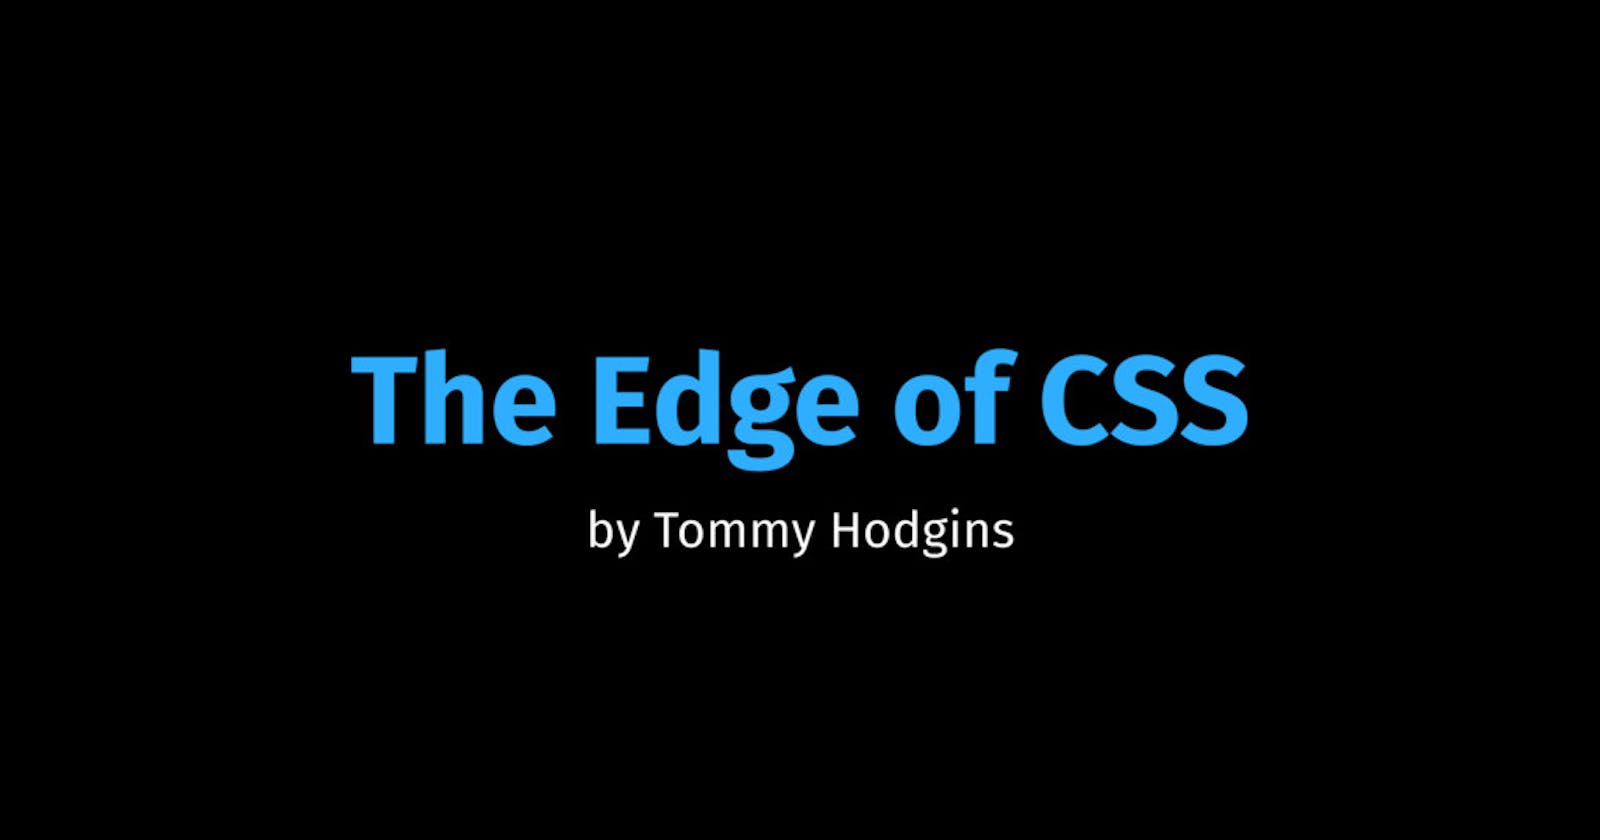 The Edge of CSS